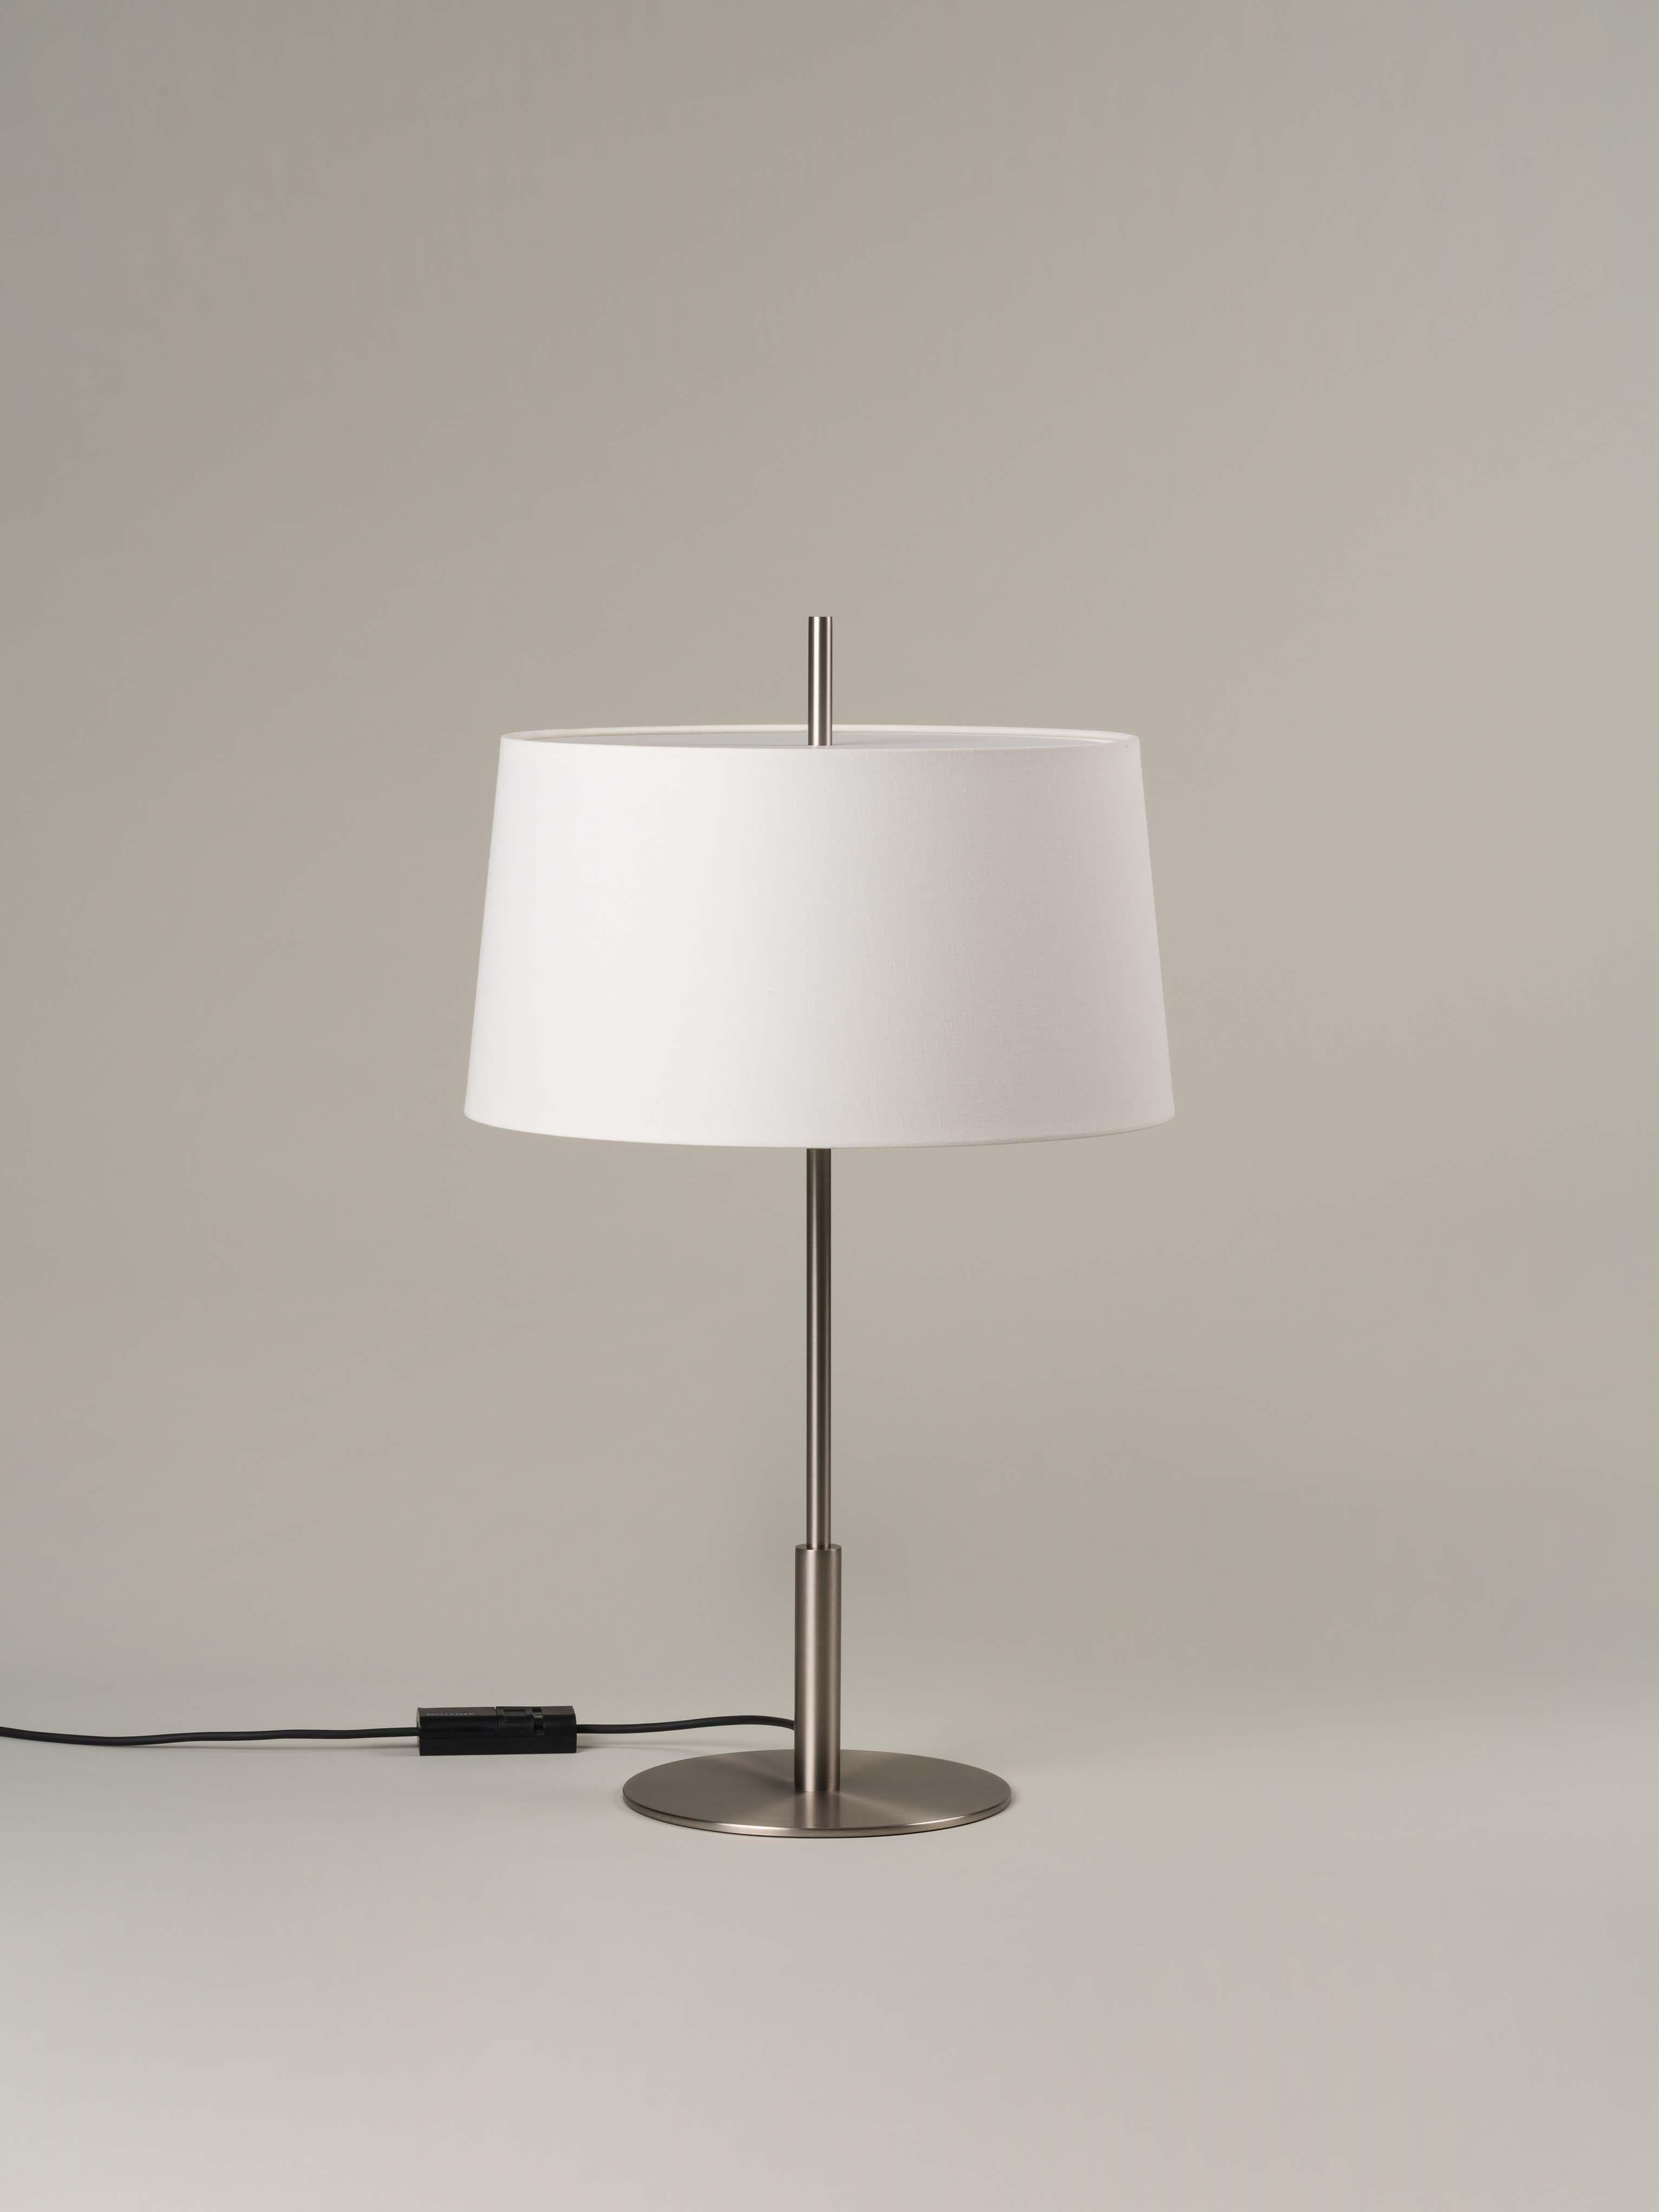 Nickel Diana table lamp by Federico Correa, Alfonso Milá, Miguel Milá
Dimensions: D 45 x H 78 cm
Materials: White linen, nickel.
Available in black or white lampshade and in gold or nickel finish.

In keeping with the calling of its creators,